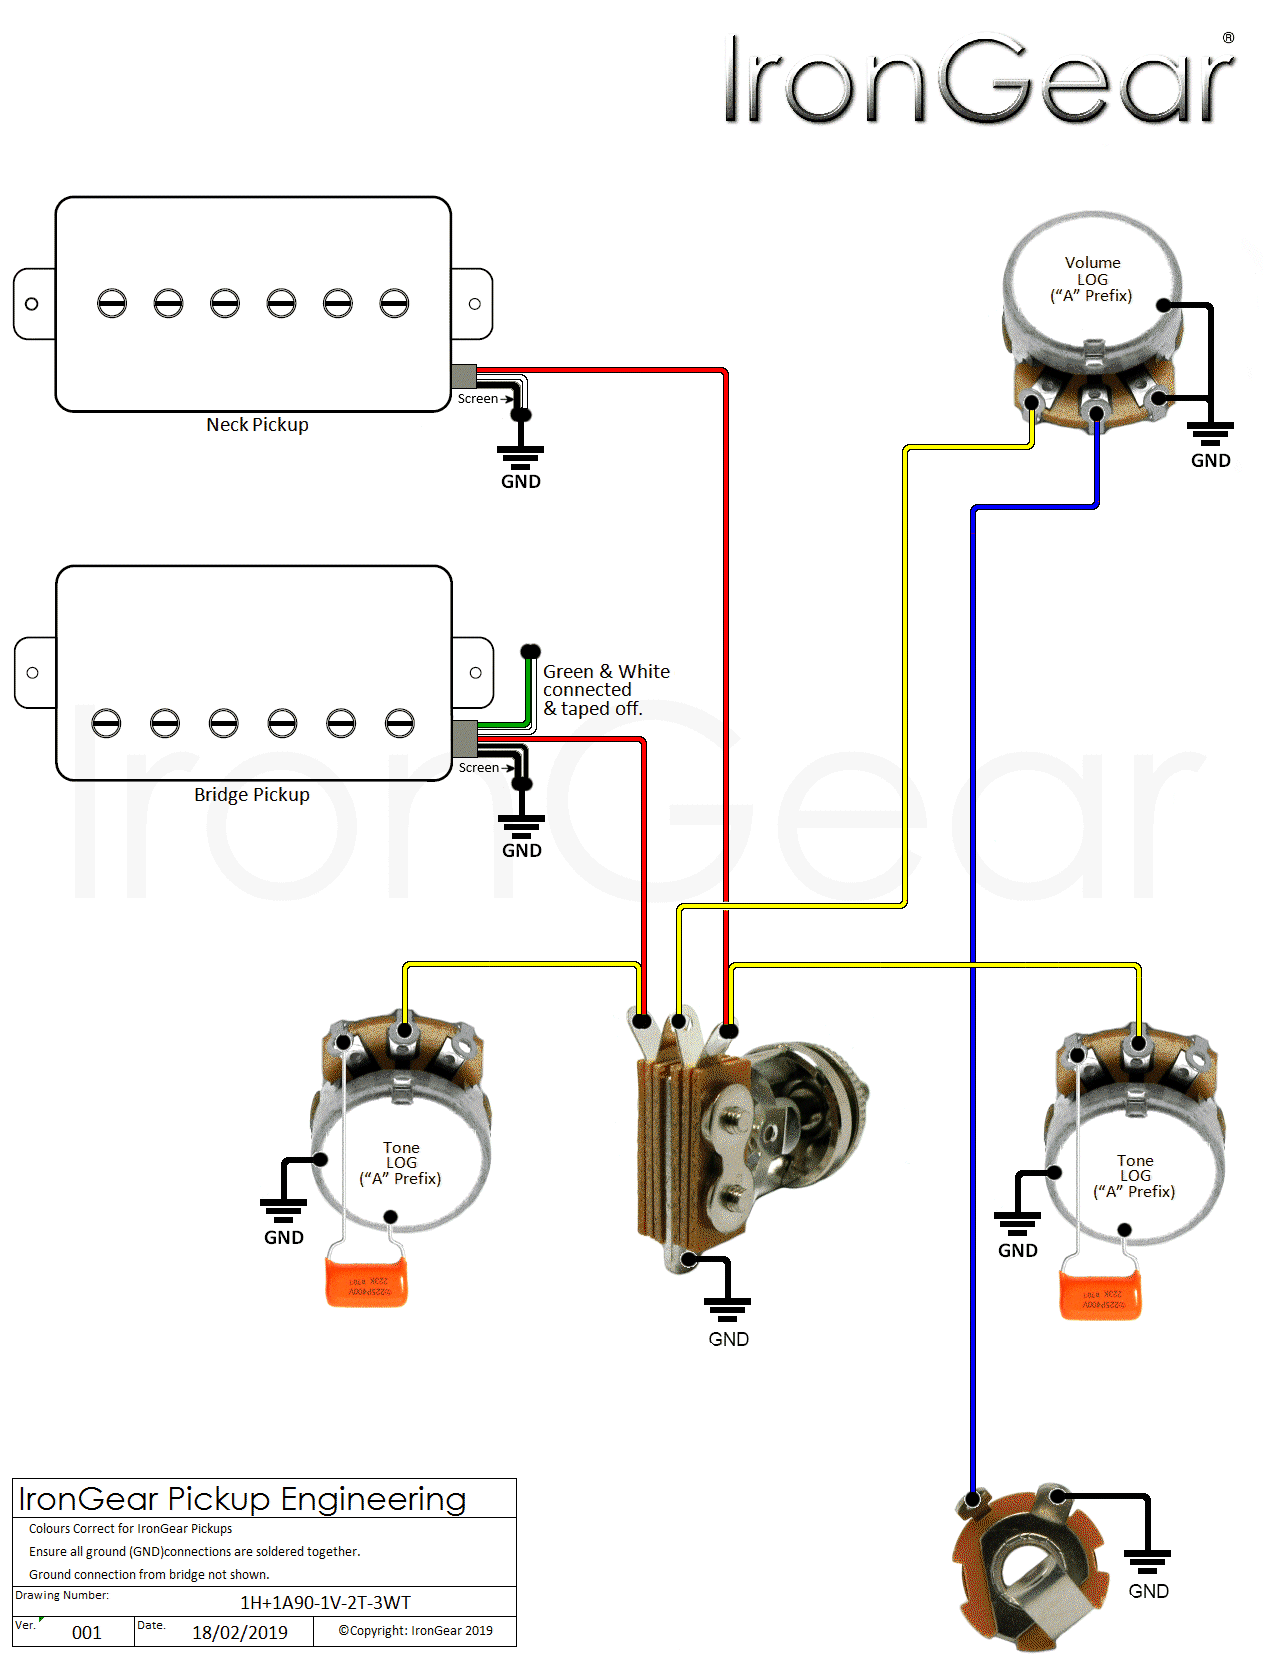 Guitar Wiring Diagram Two Humbuckers Super 5 Way Switch from www.irongear.co.uk